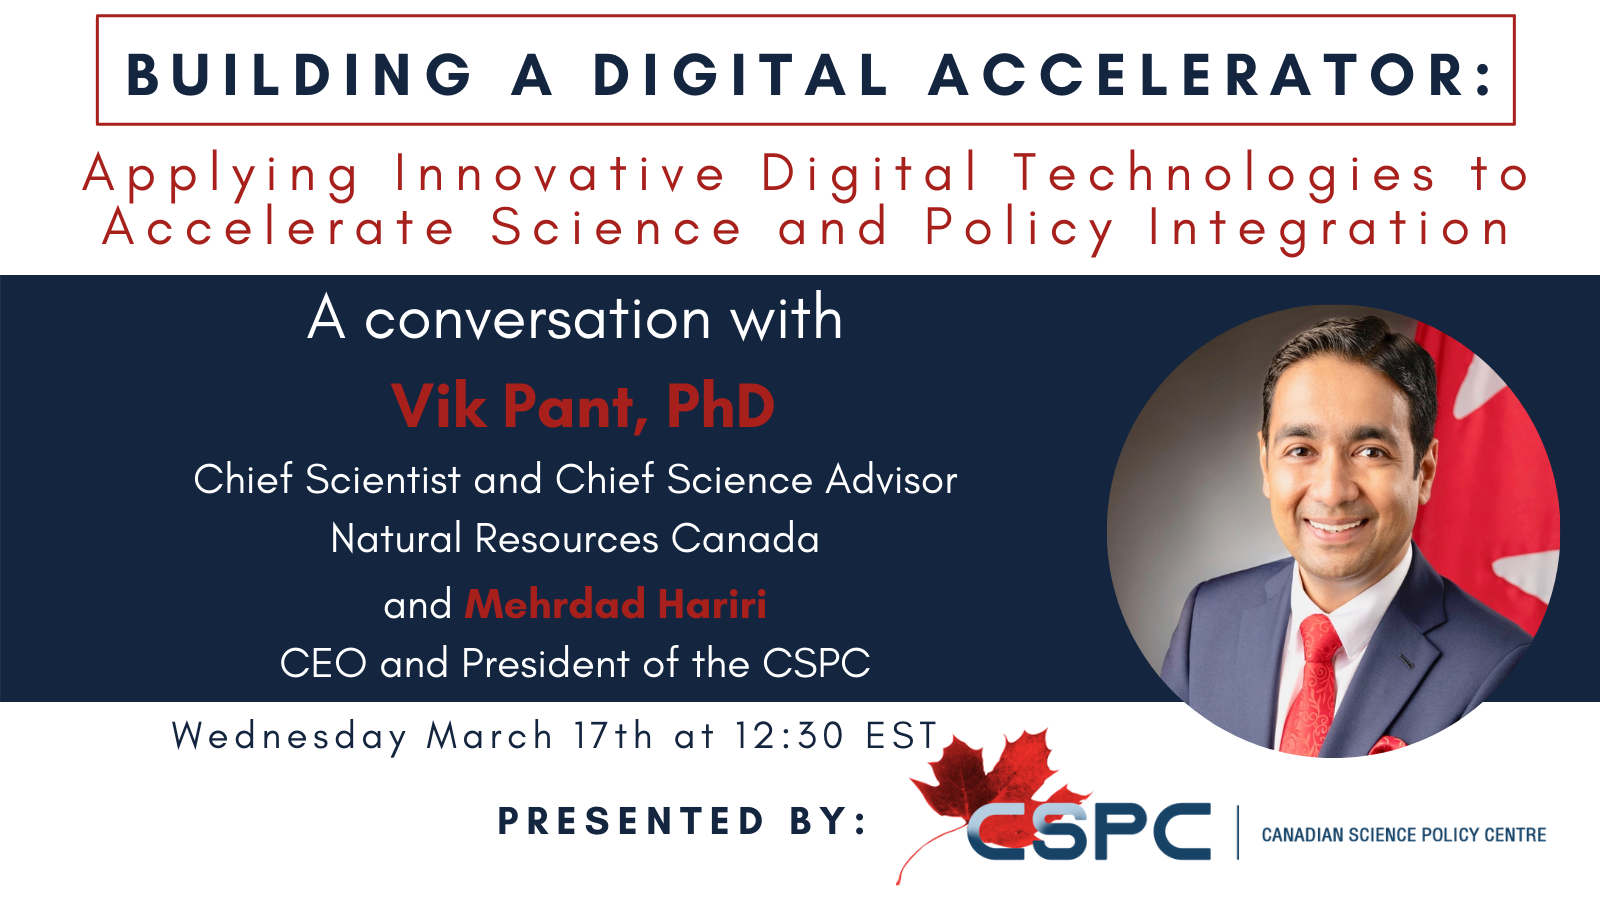 the banner for the even with Chief Scientist and Chief Science Advisor for Natural Resources Canada, Dr. Vik Pant on “Building a Digital Accelerator: Applying Innovative Digital Technologies for Advancing Science and Policy Integration”, featuring his headshot in front of a Canadian flag.